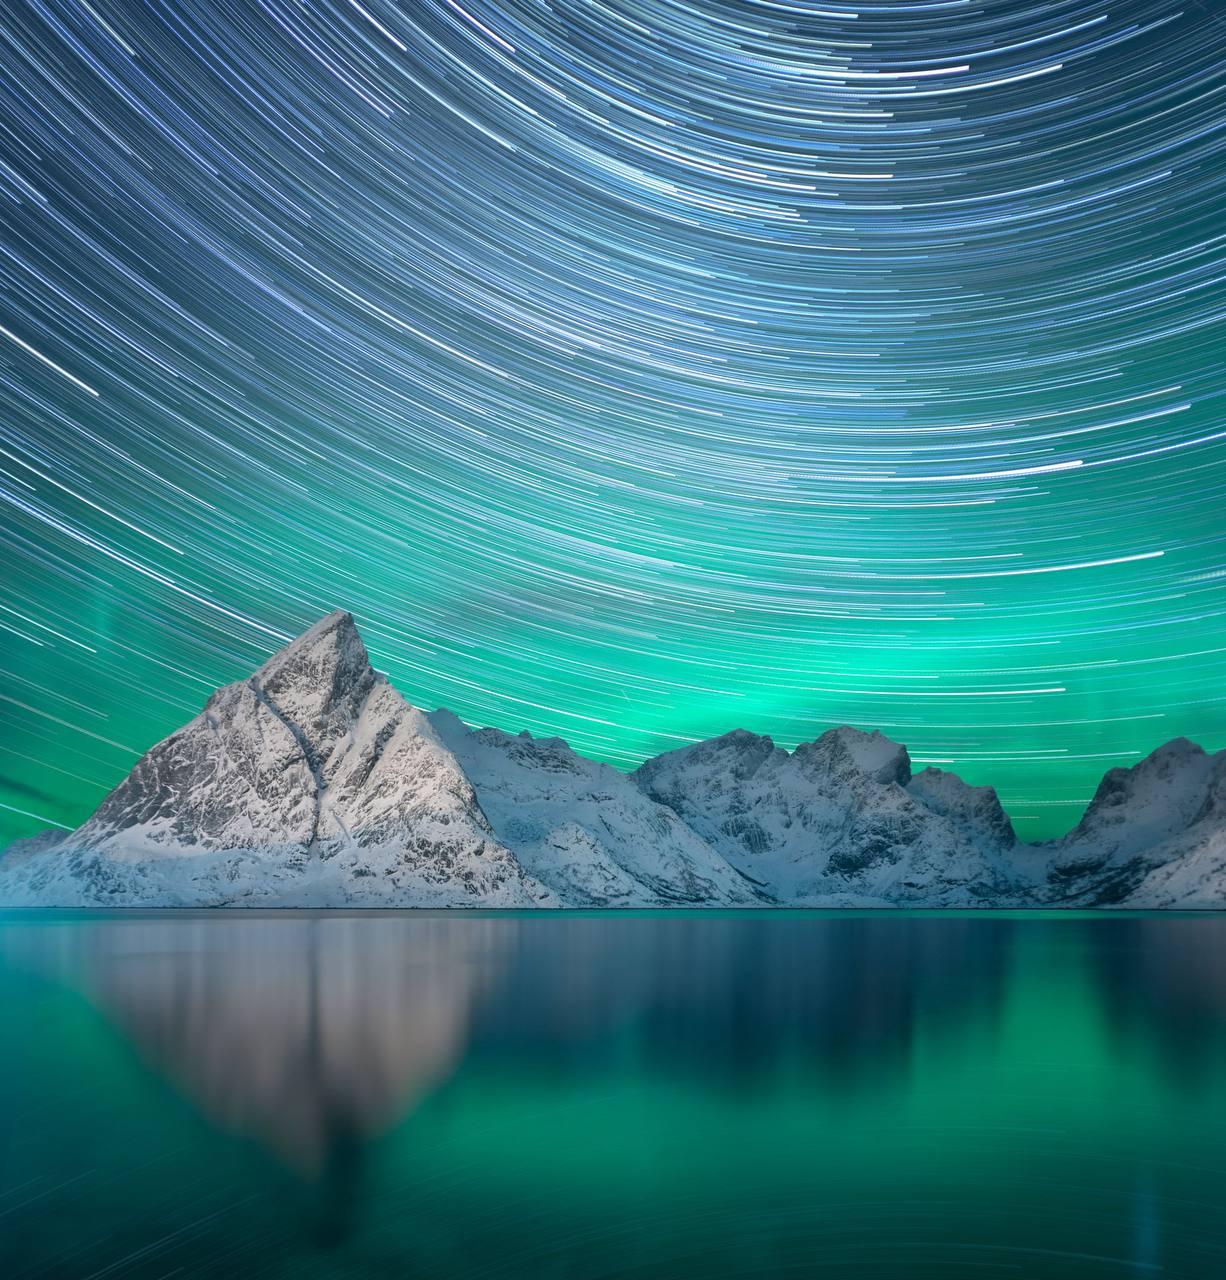 Norwegian Northern Lights: Colorful Square Photo with Star Trails